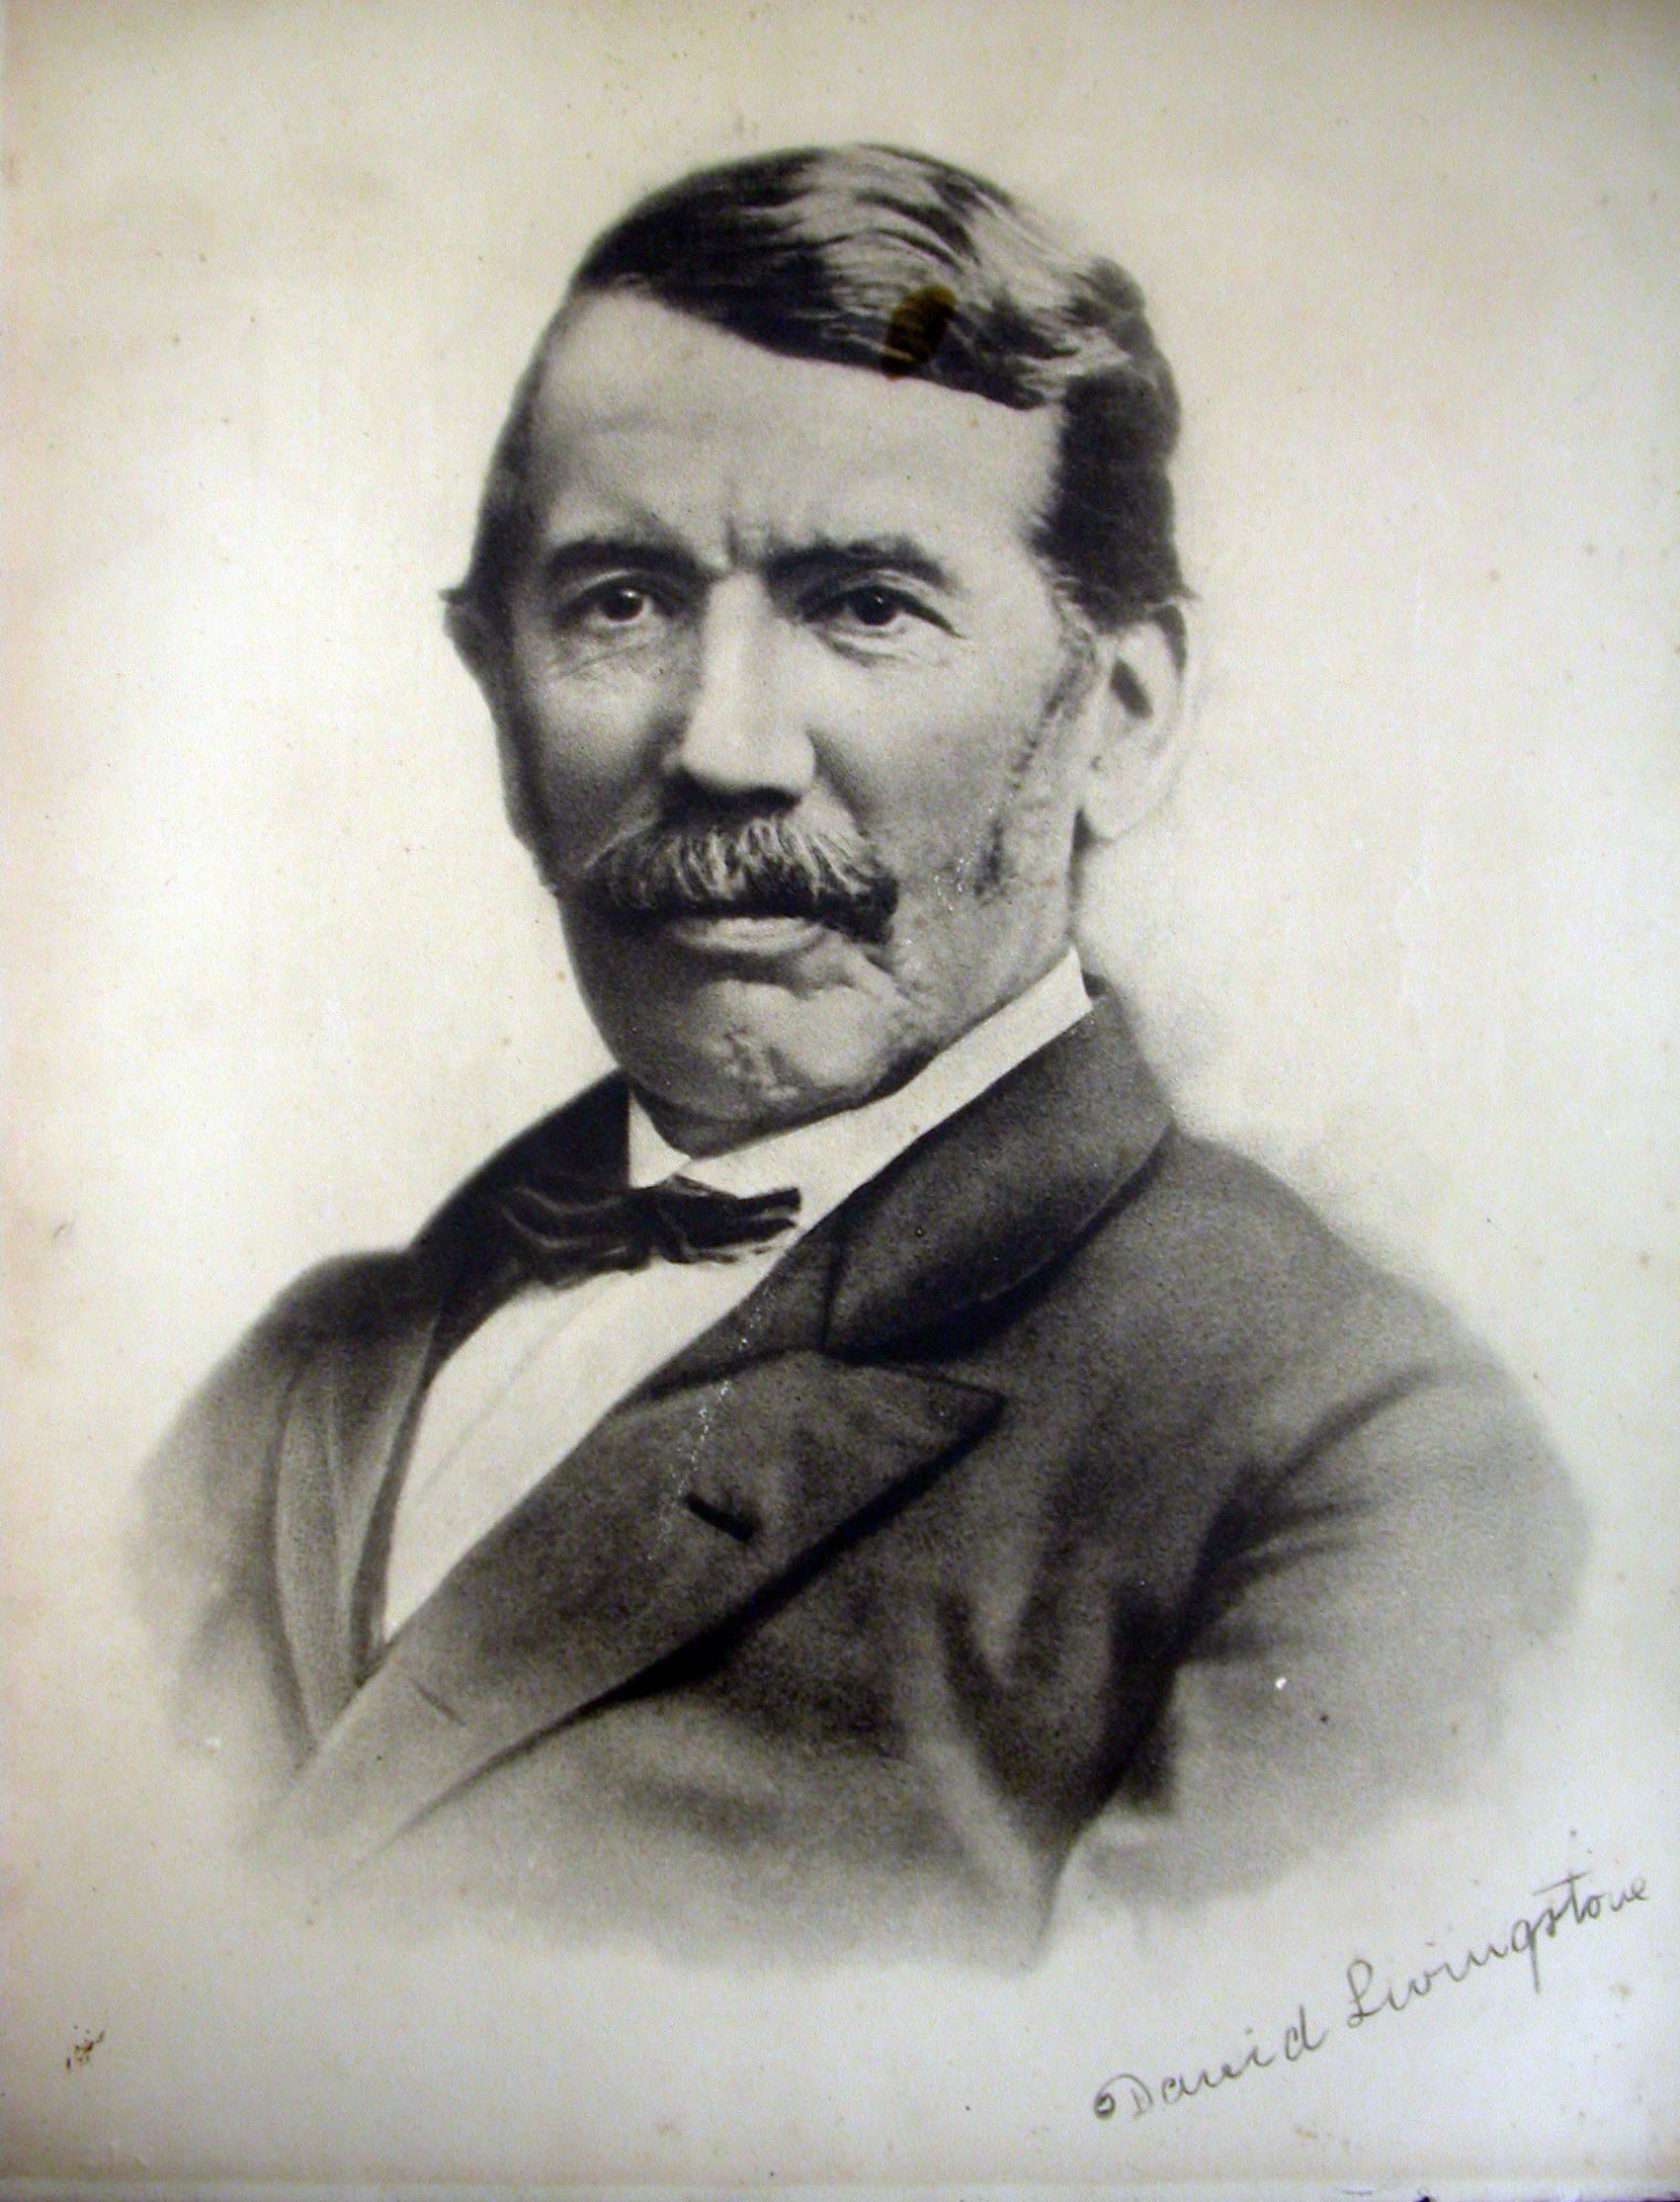 Photograph of David Livingstone, 1857. Copyright David Livingstone Centre. Object images used by permission. May not be reproduced without the express written consent of the National Trust for Scotland, on behalf of the Scottish National Memorial to David Livingstone Trust.